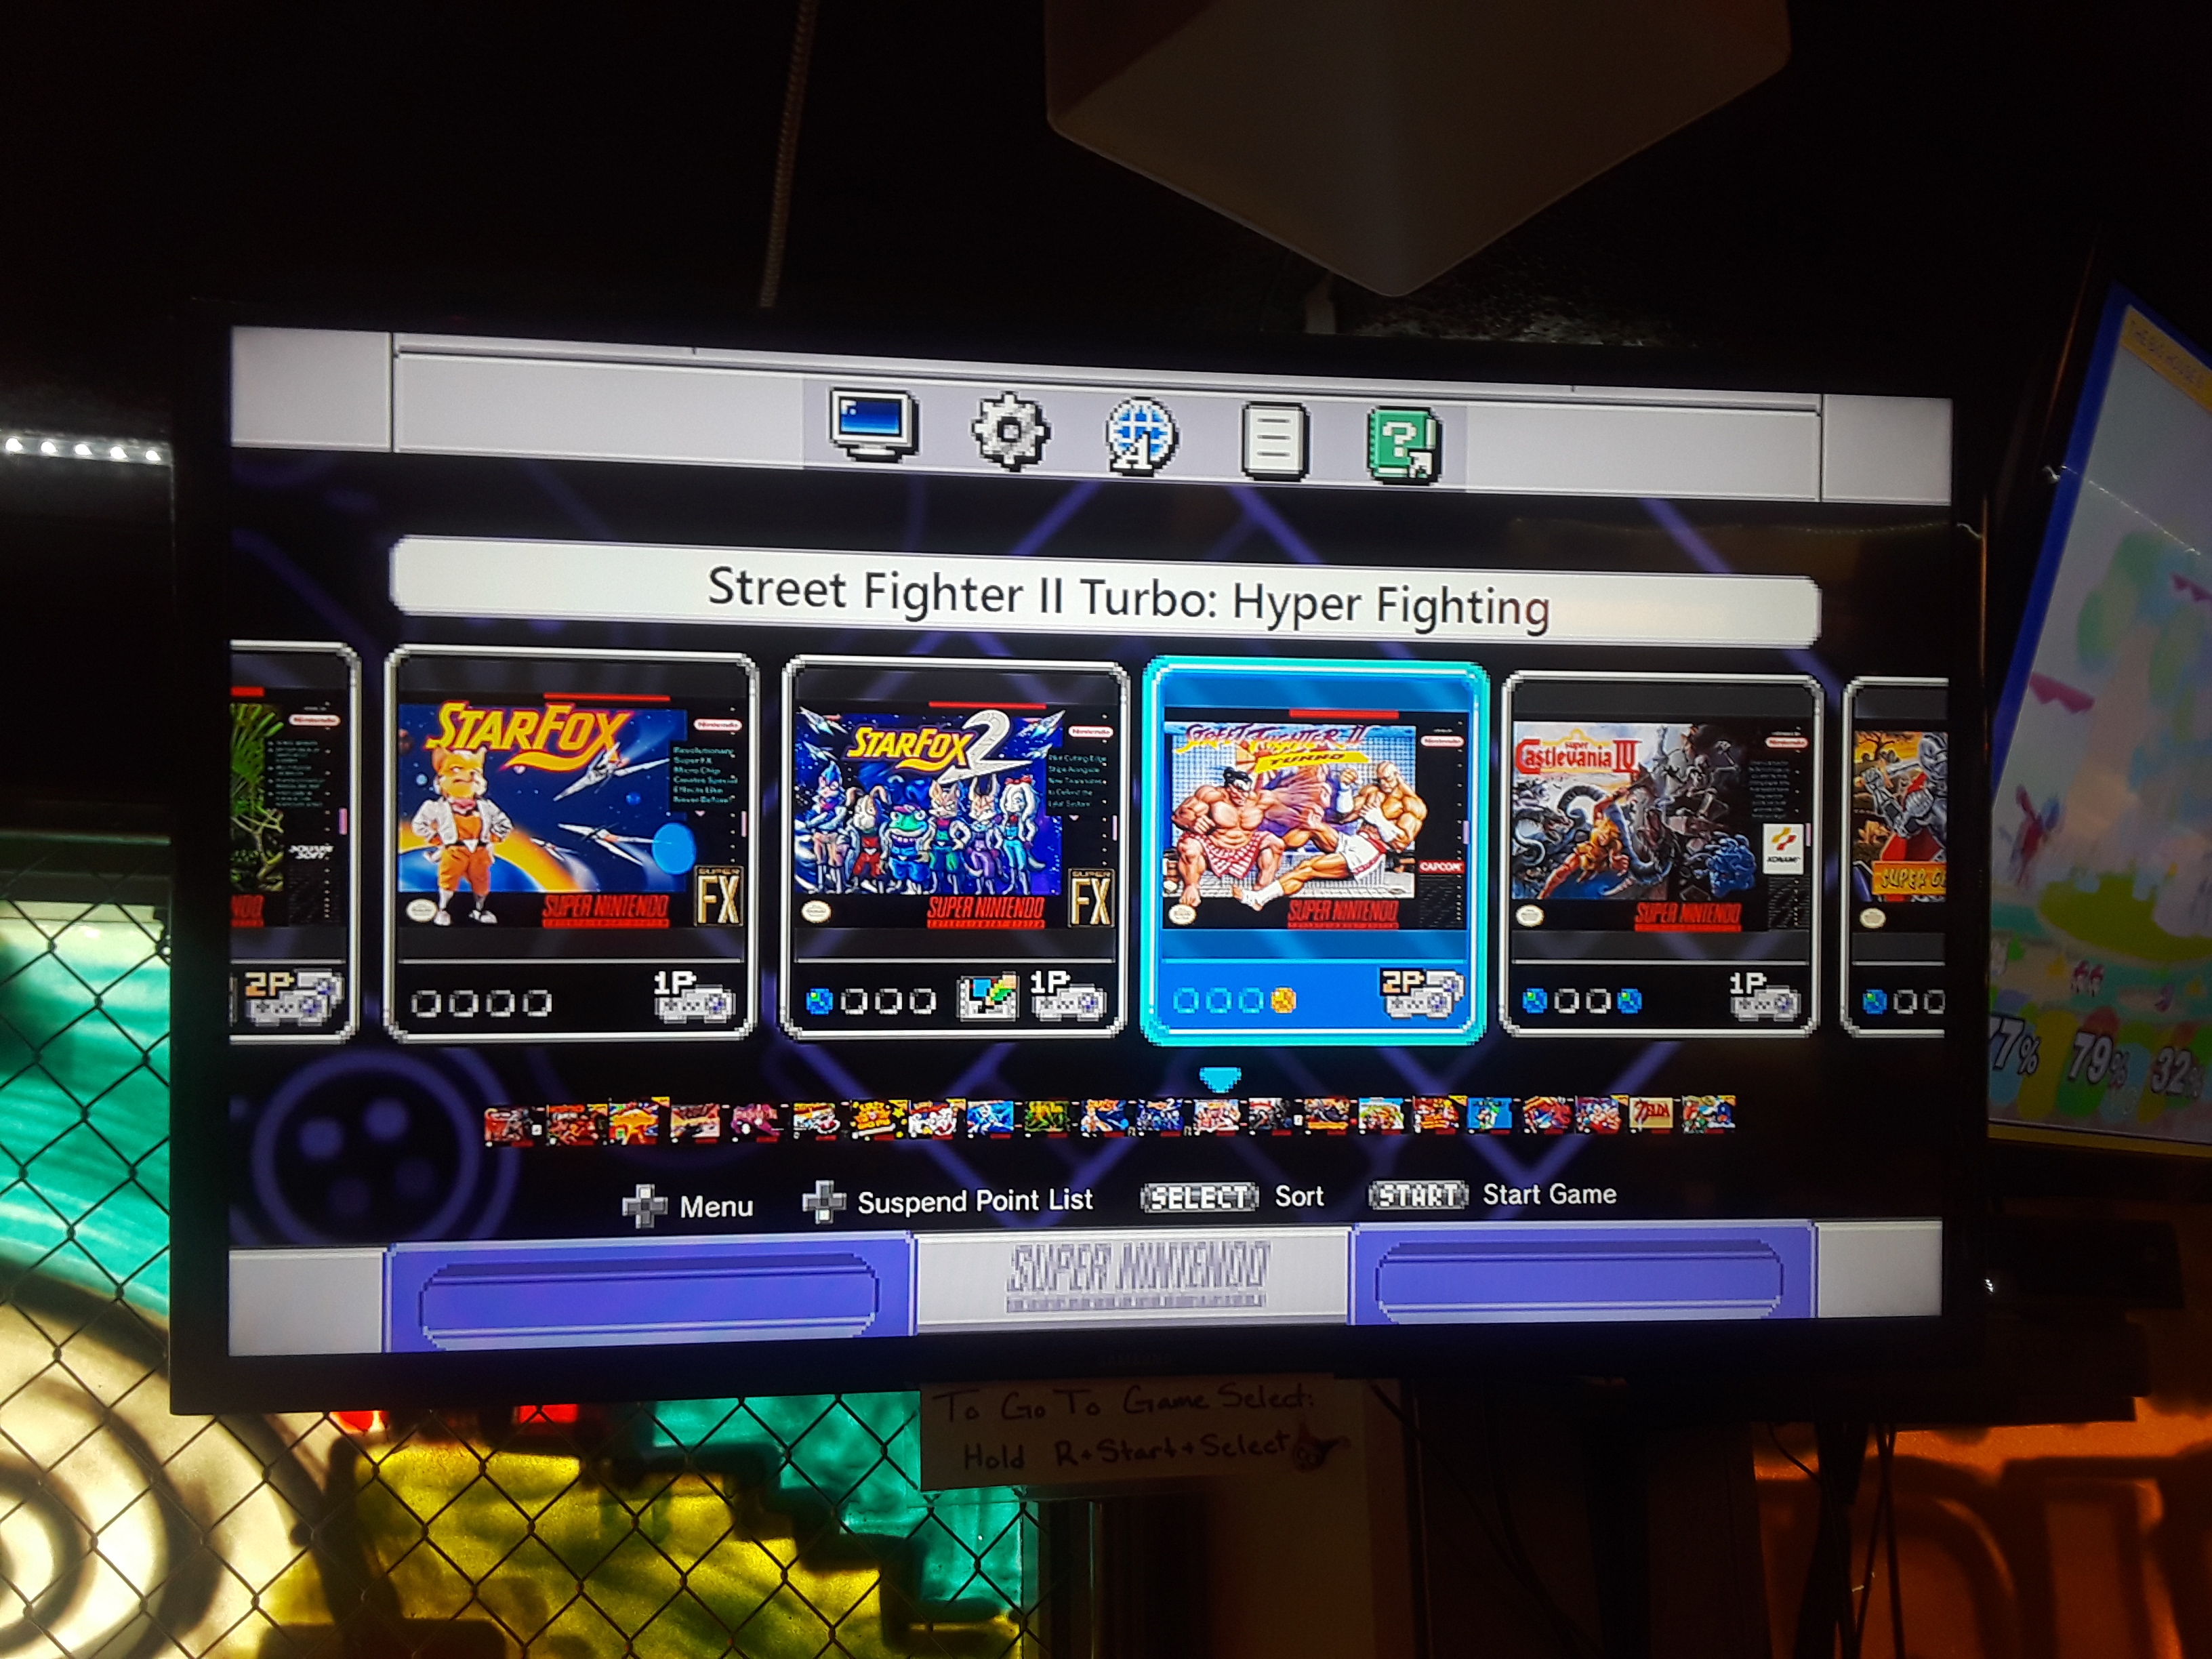 JML101582: Street Fighter II Turbo: Hyper Fighting [Normal / Difficulty 1] (SNES/Super Famicom Emulated) 517,680 points on 2018-10-06 16:42:59